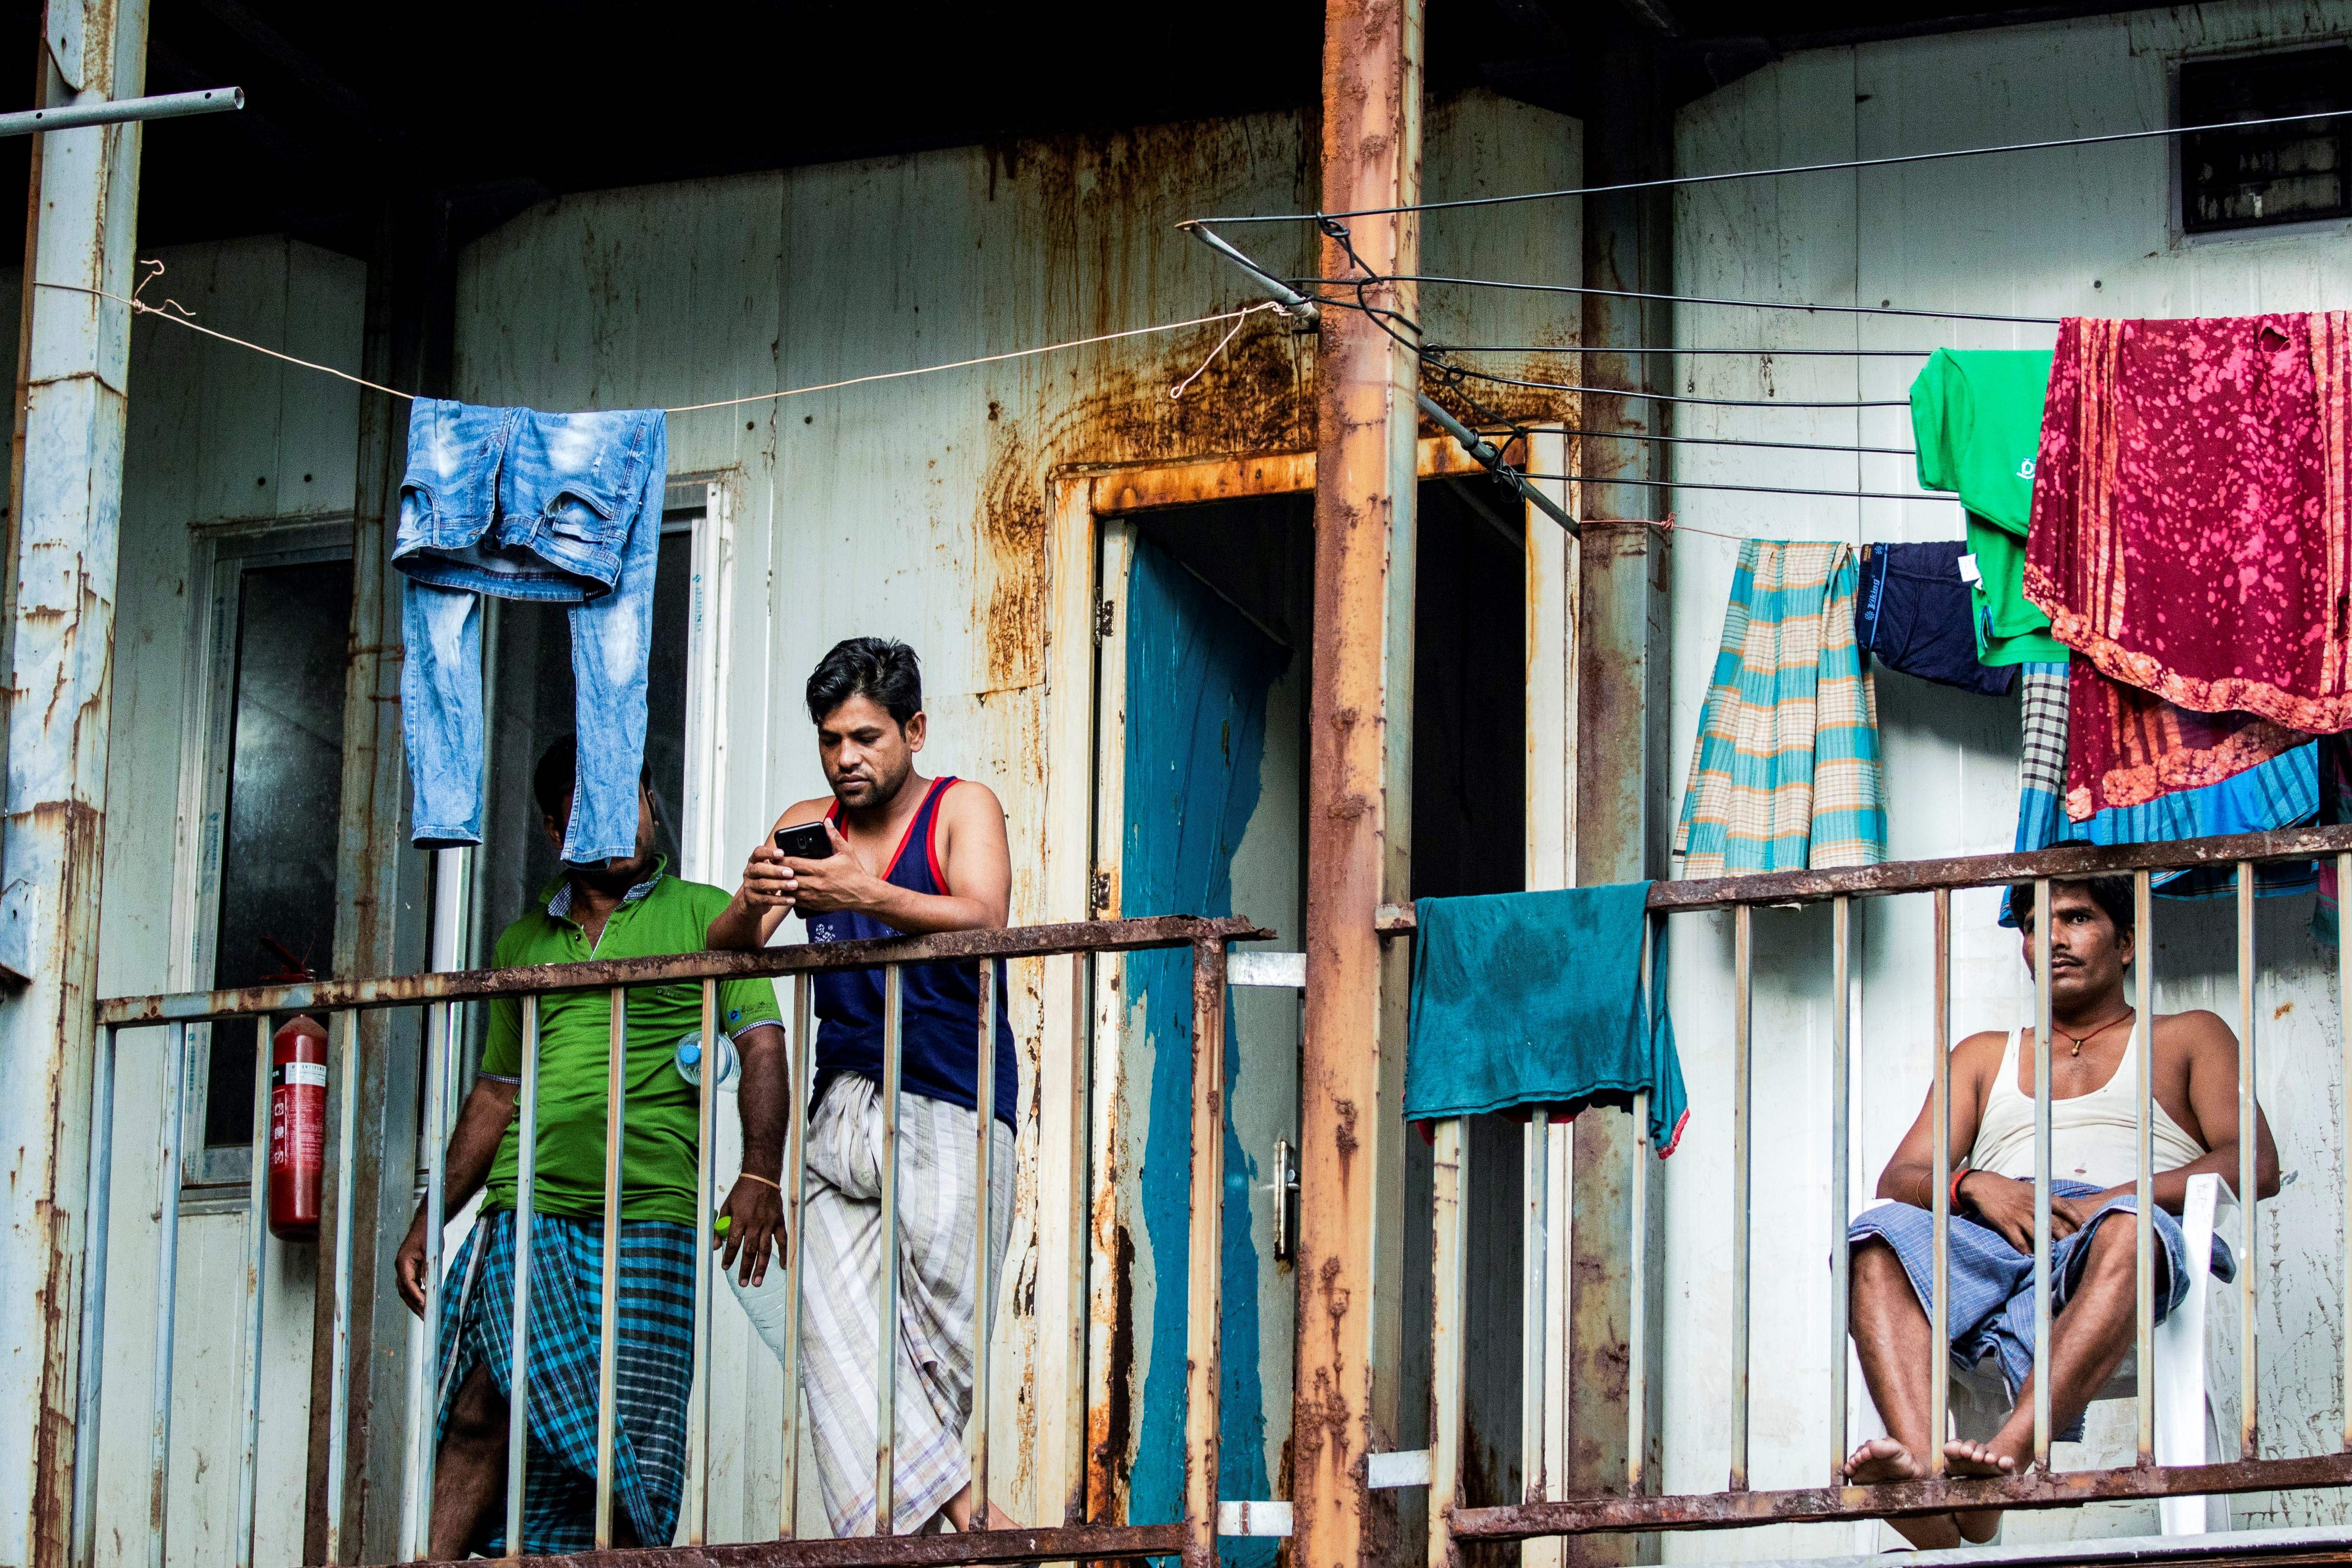 Workers from Bangladesh gathering in their accommodation block in Malé, Maldives, May 9, 2020. 